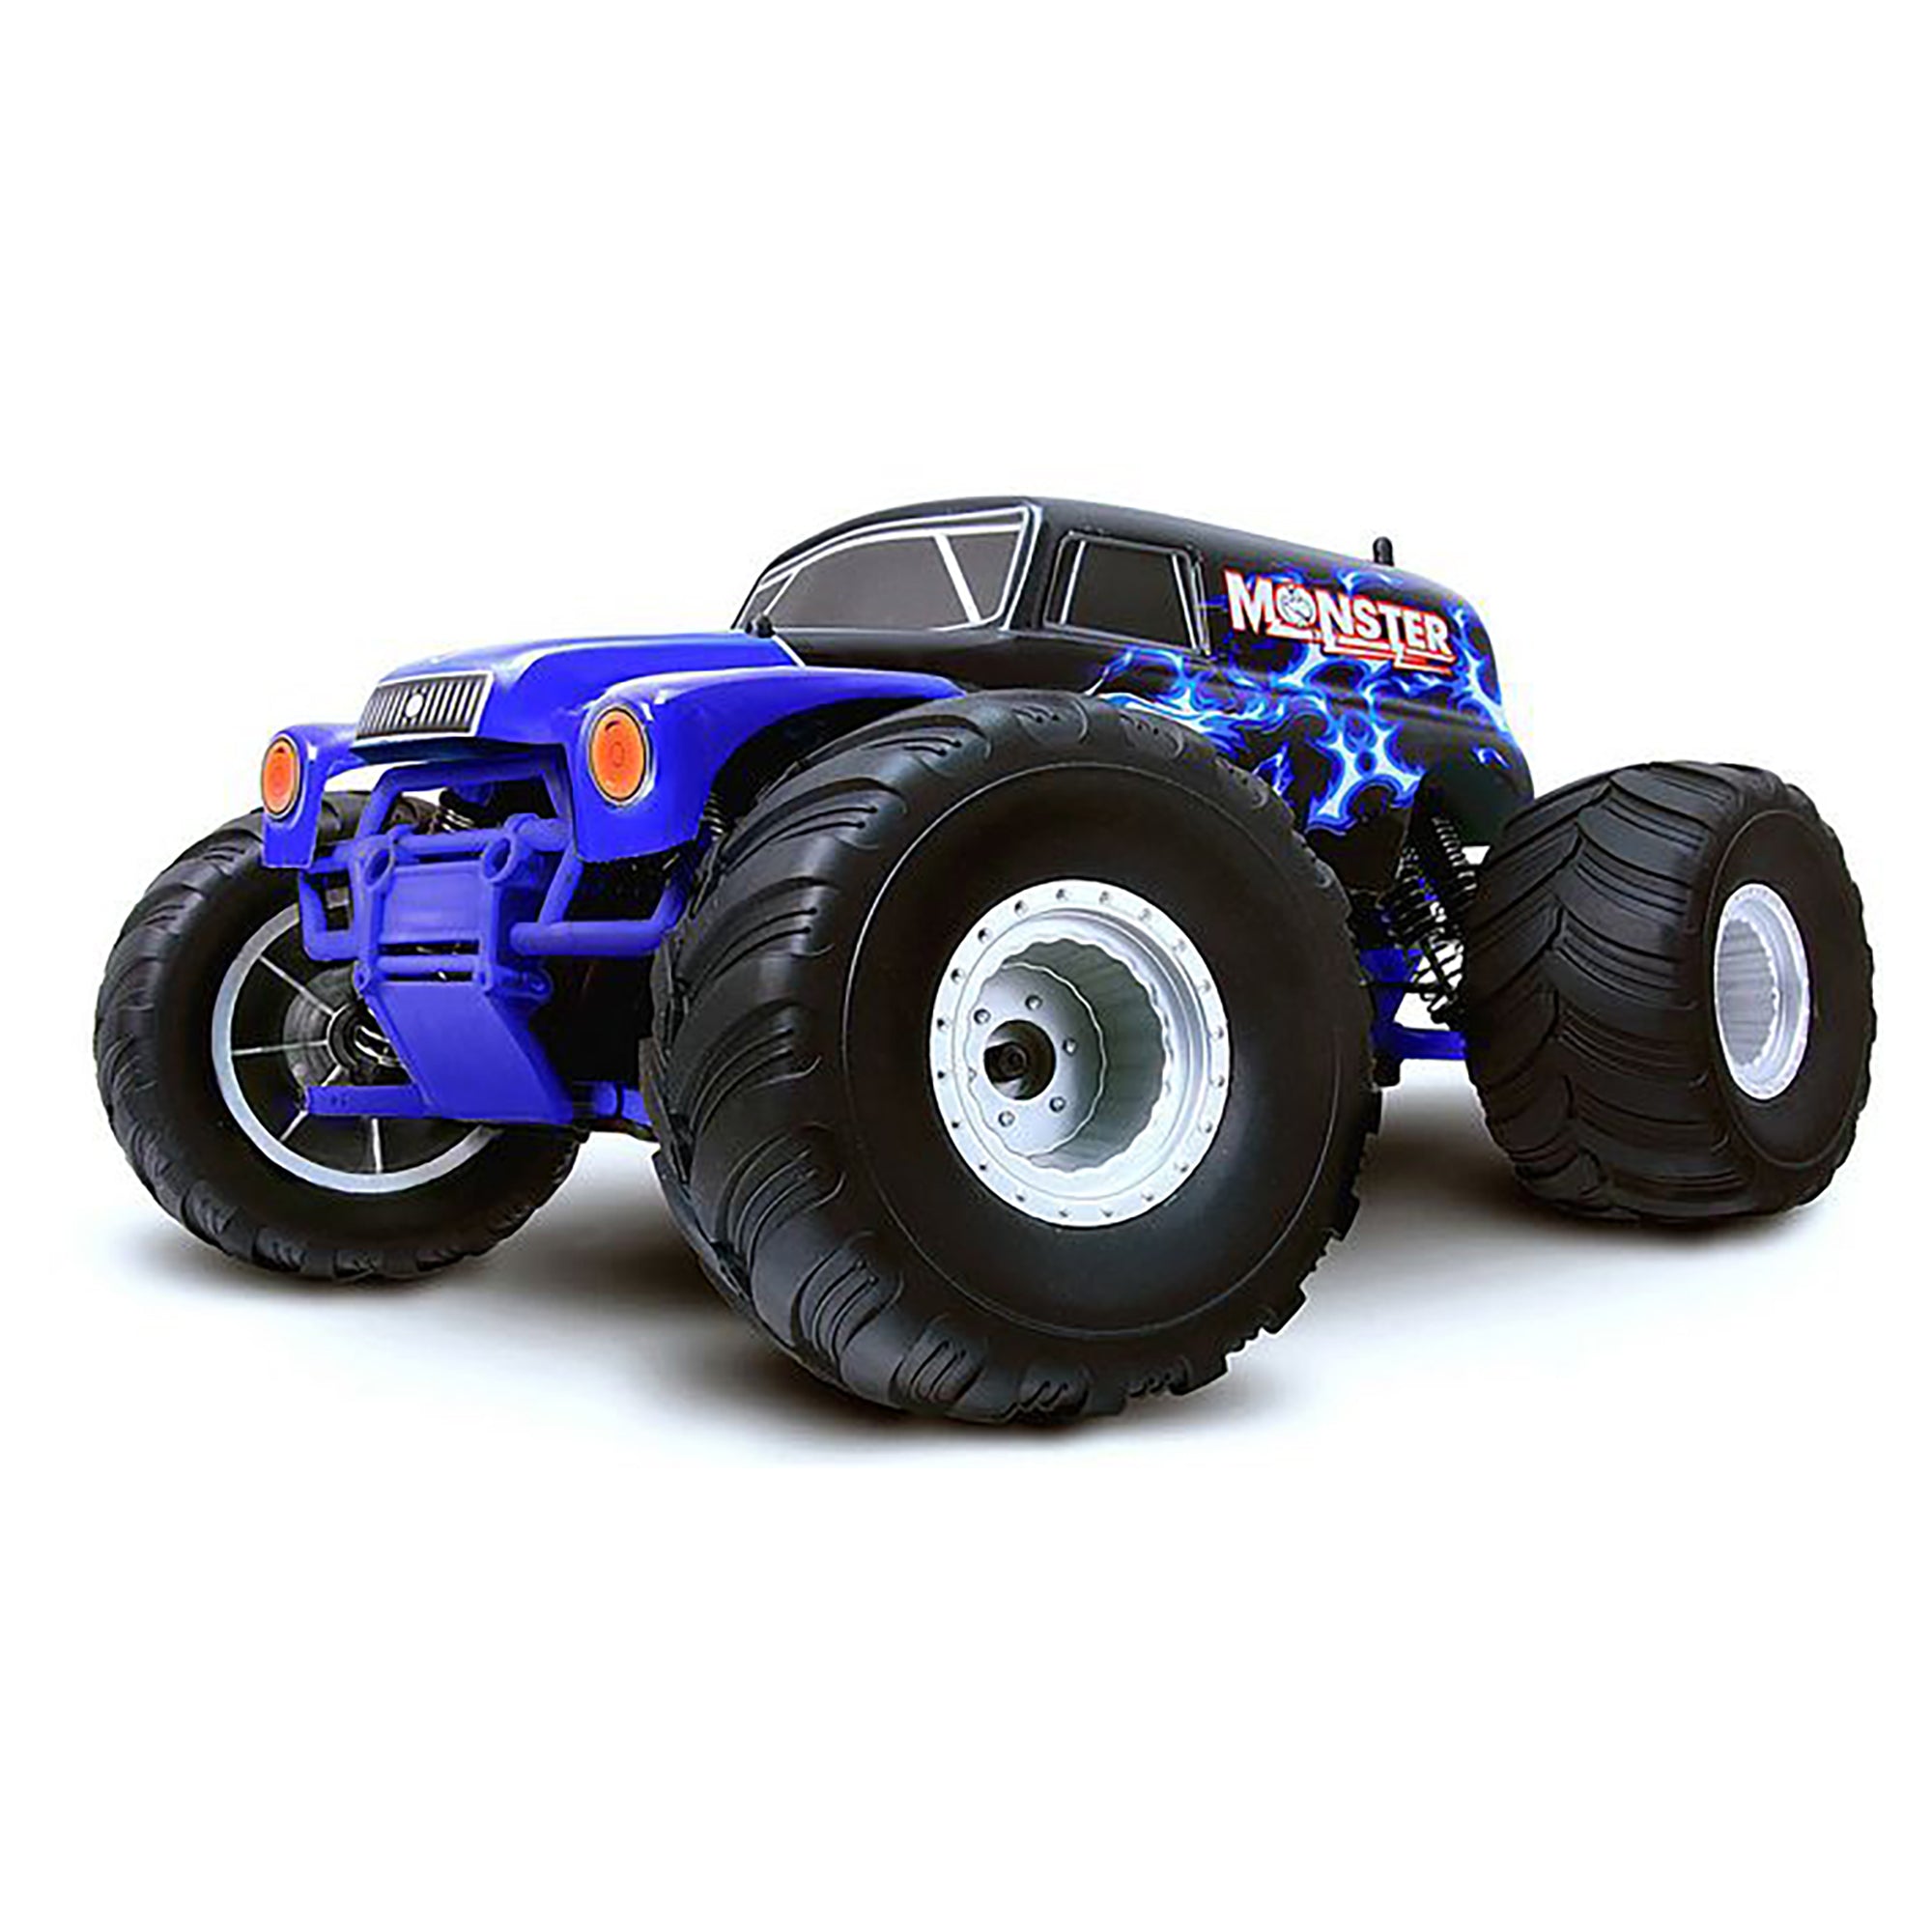 HSP Racing Monster Truck Special Edition 2.4GHz Electric 4WD Off Road RTR RC Truck